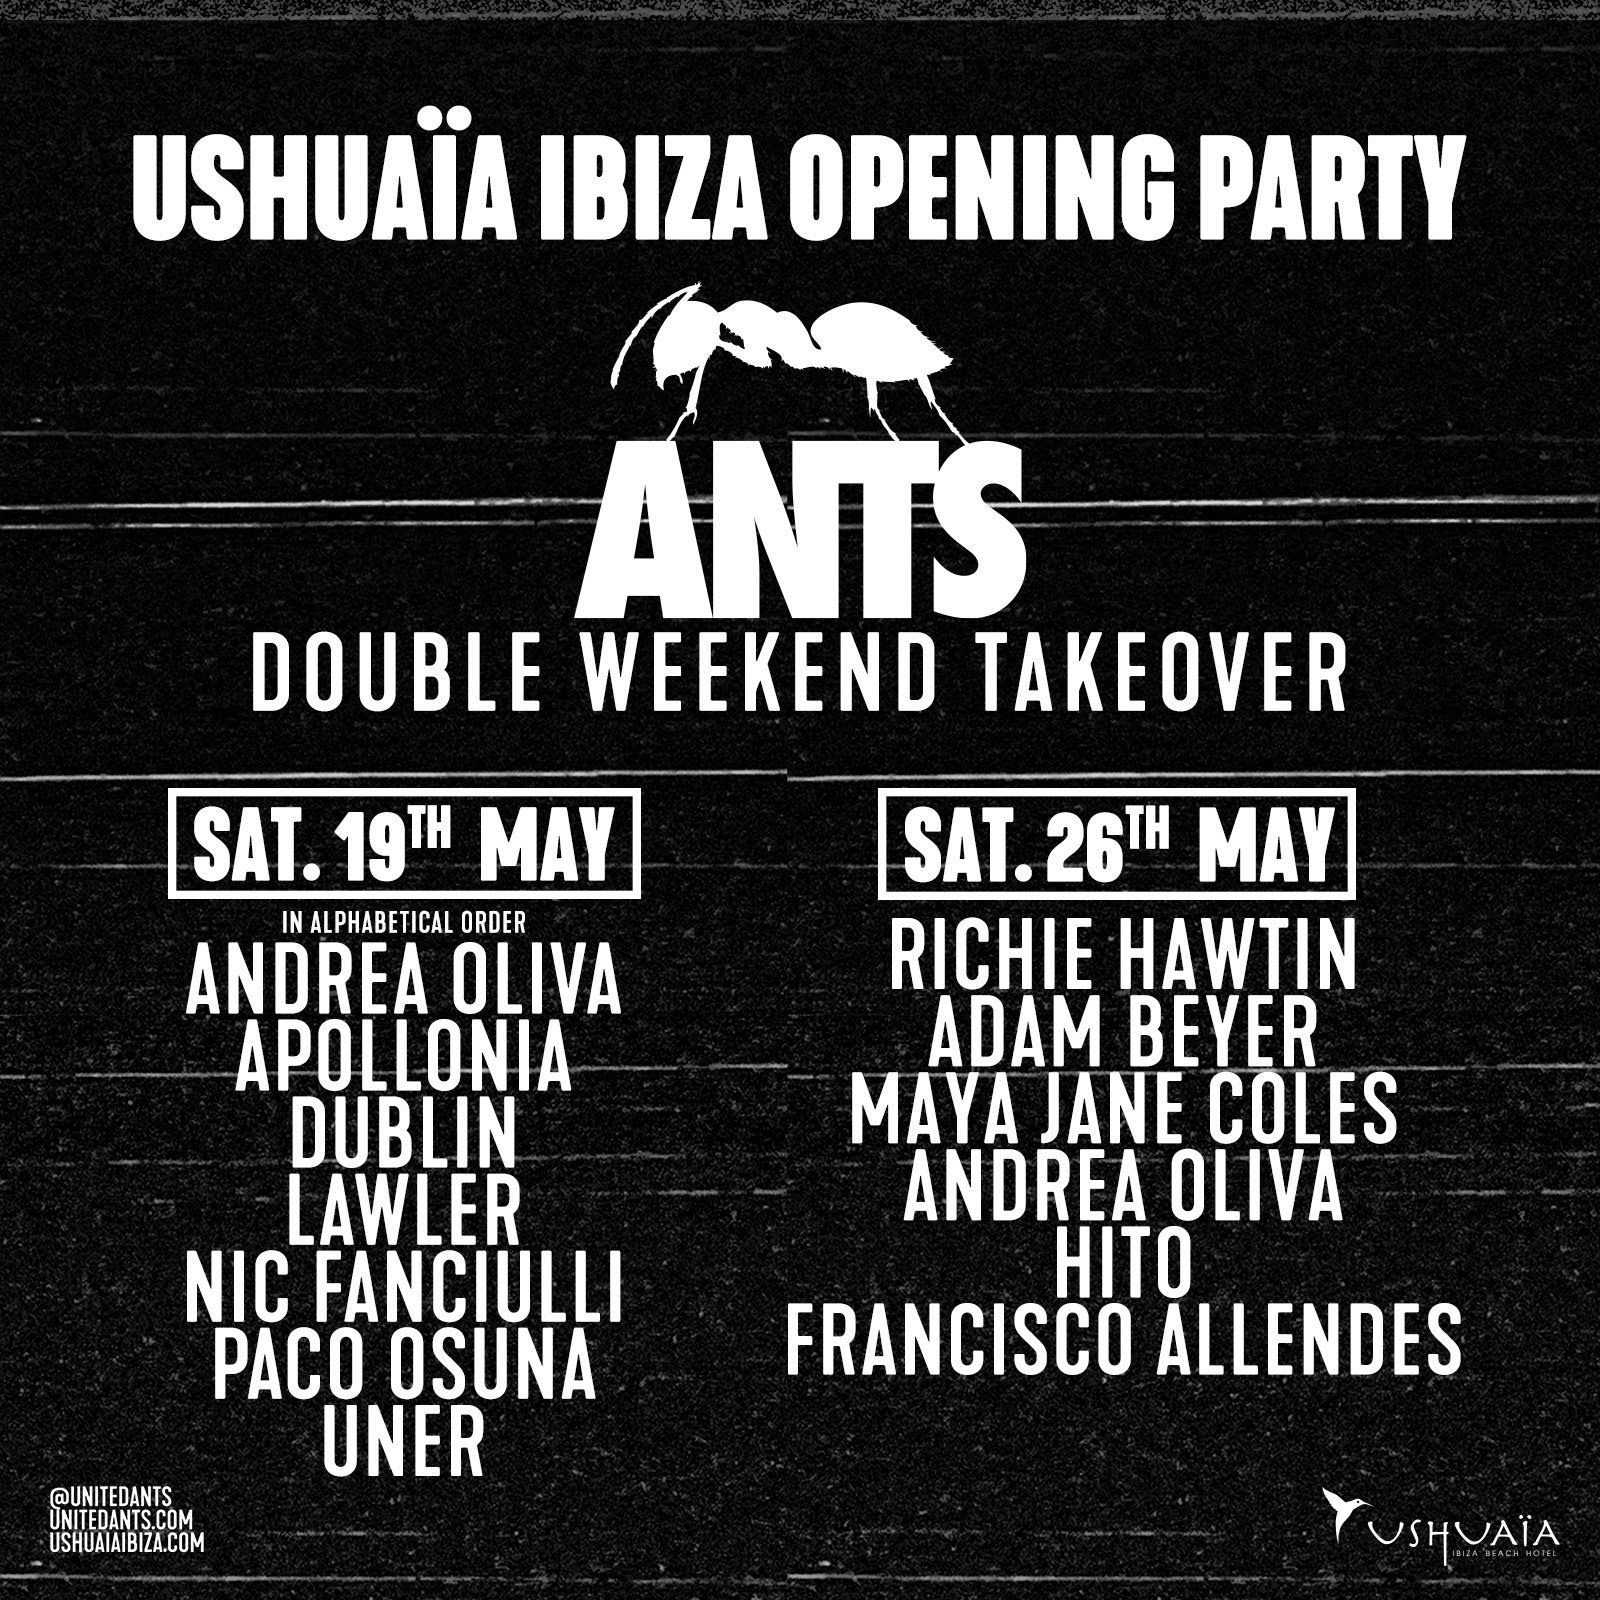 ANTS Invades Ushuaia Ibiza Opening Parties for a Double Weekend Hitter